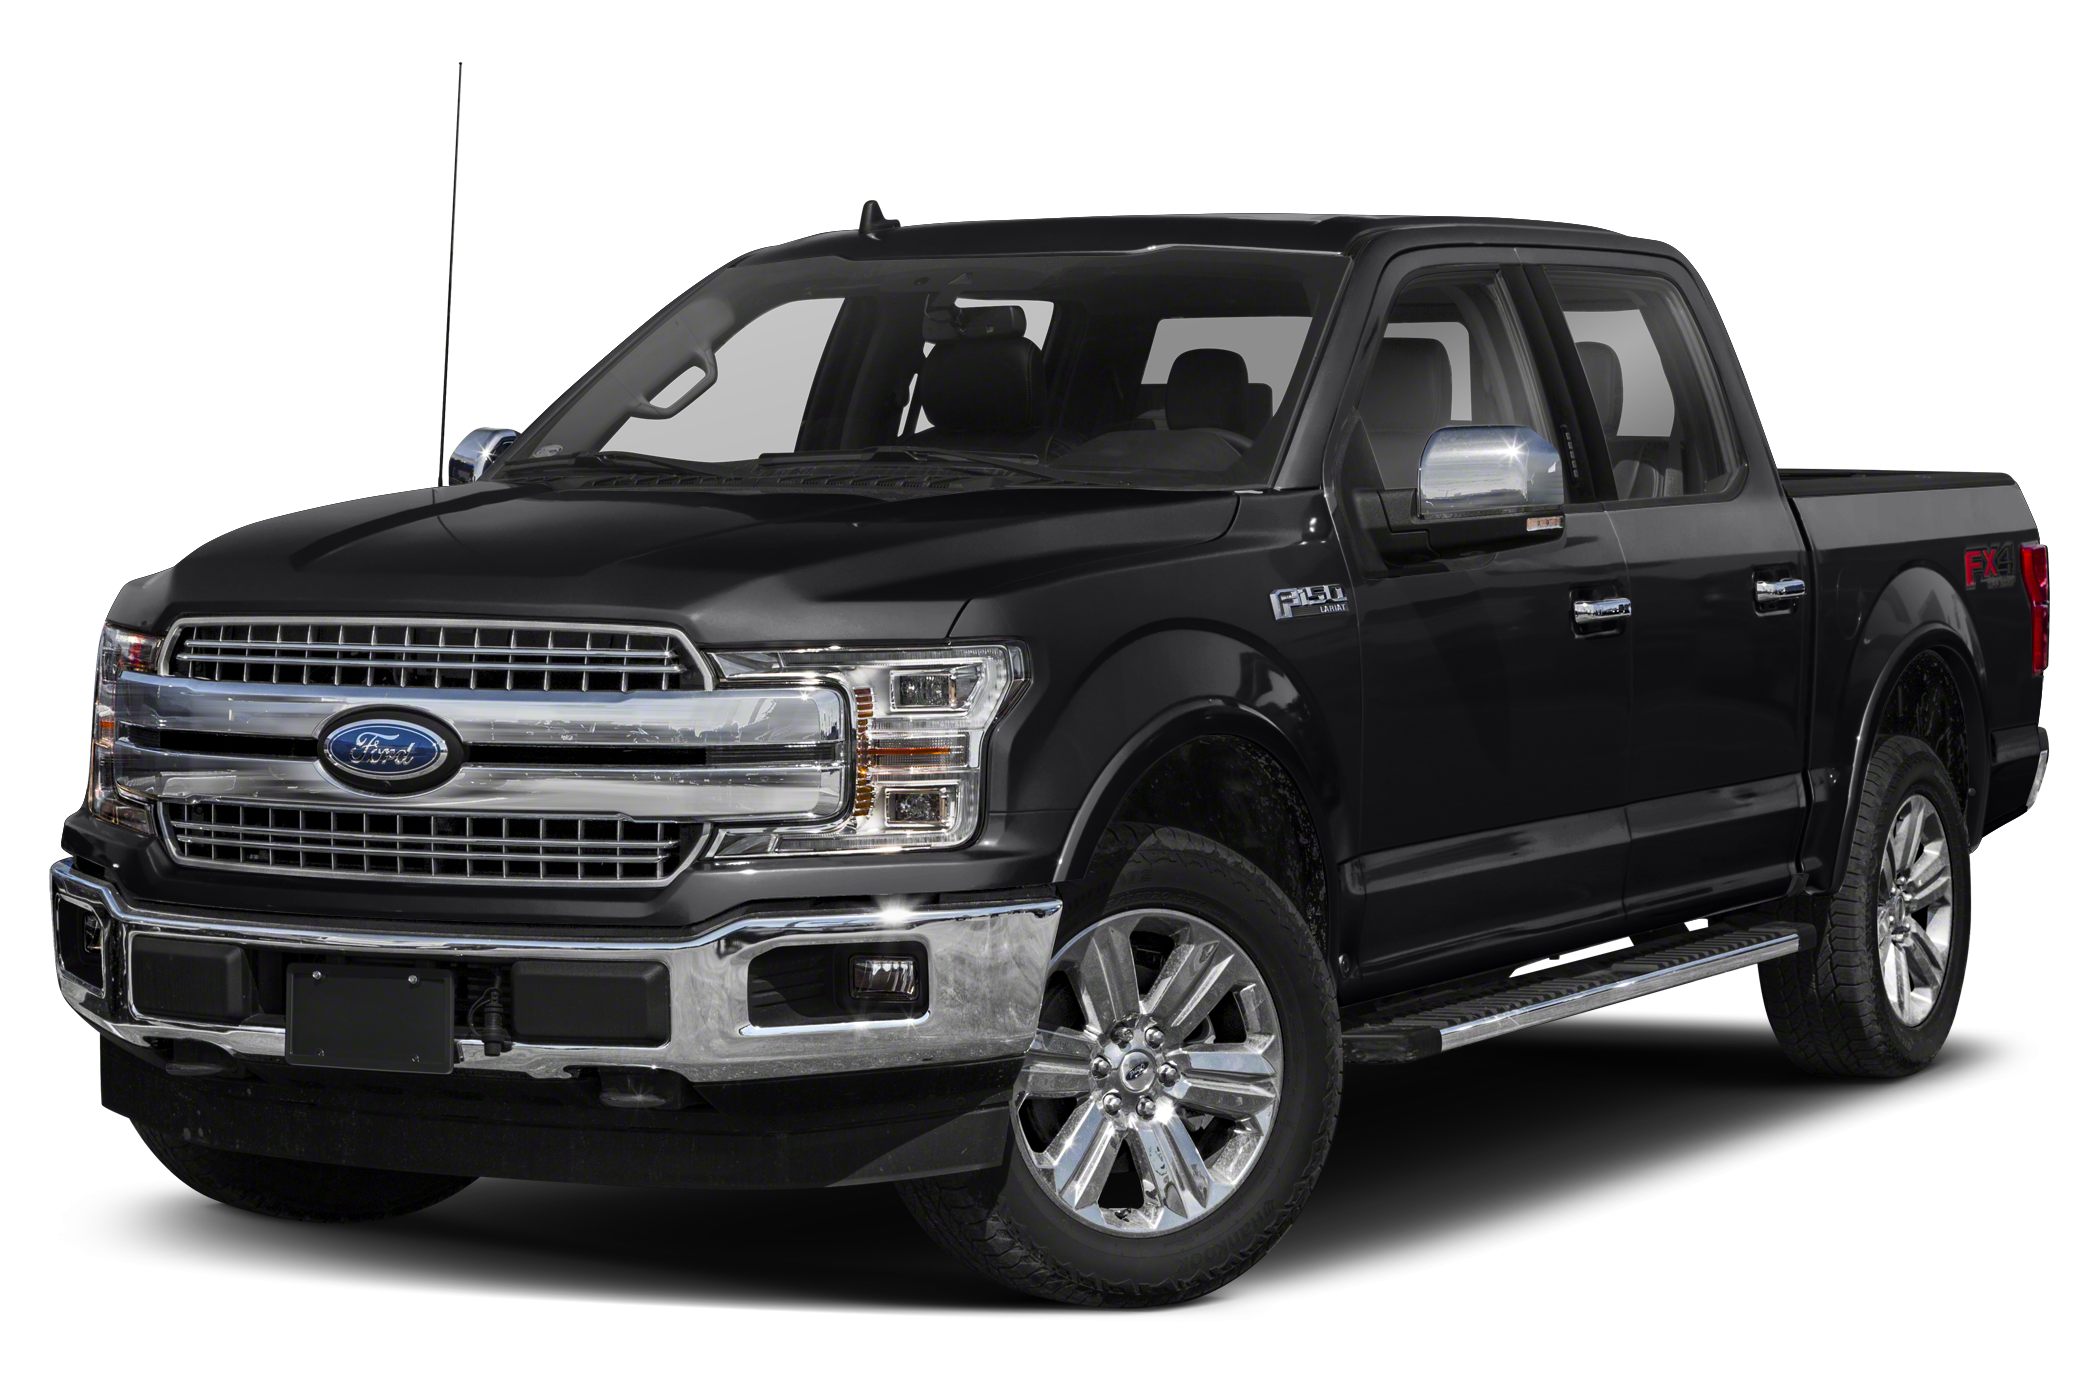 2018 Ford F 150 Lariat 4x2 Supercrew Cab Styleside 5 5 Ft Box 145 In Wb Pictures